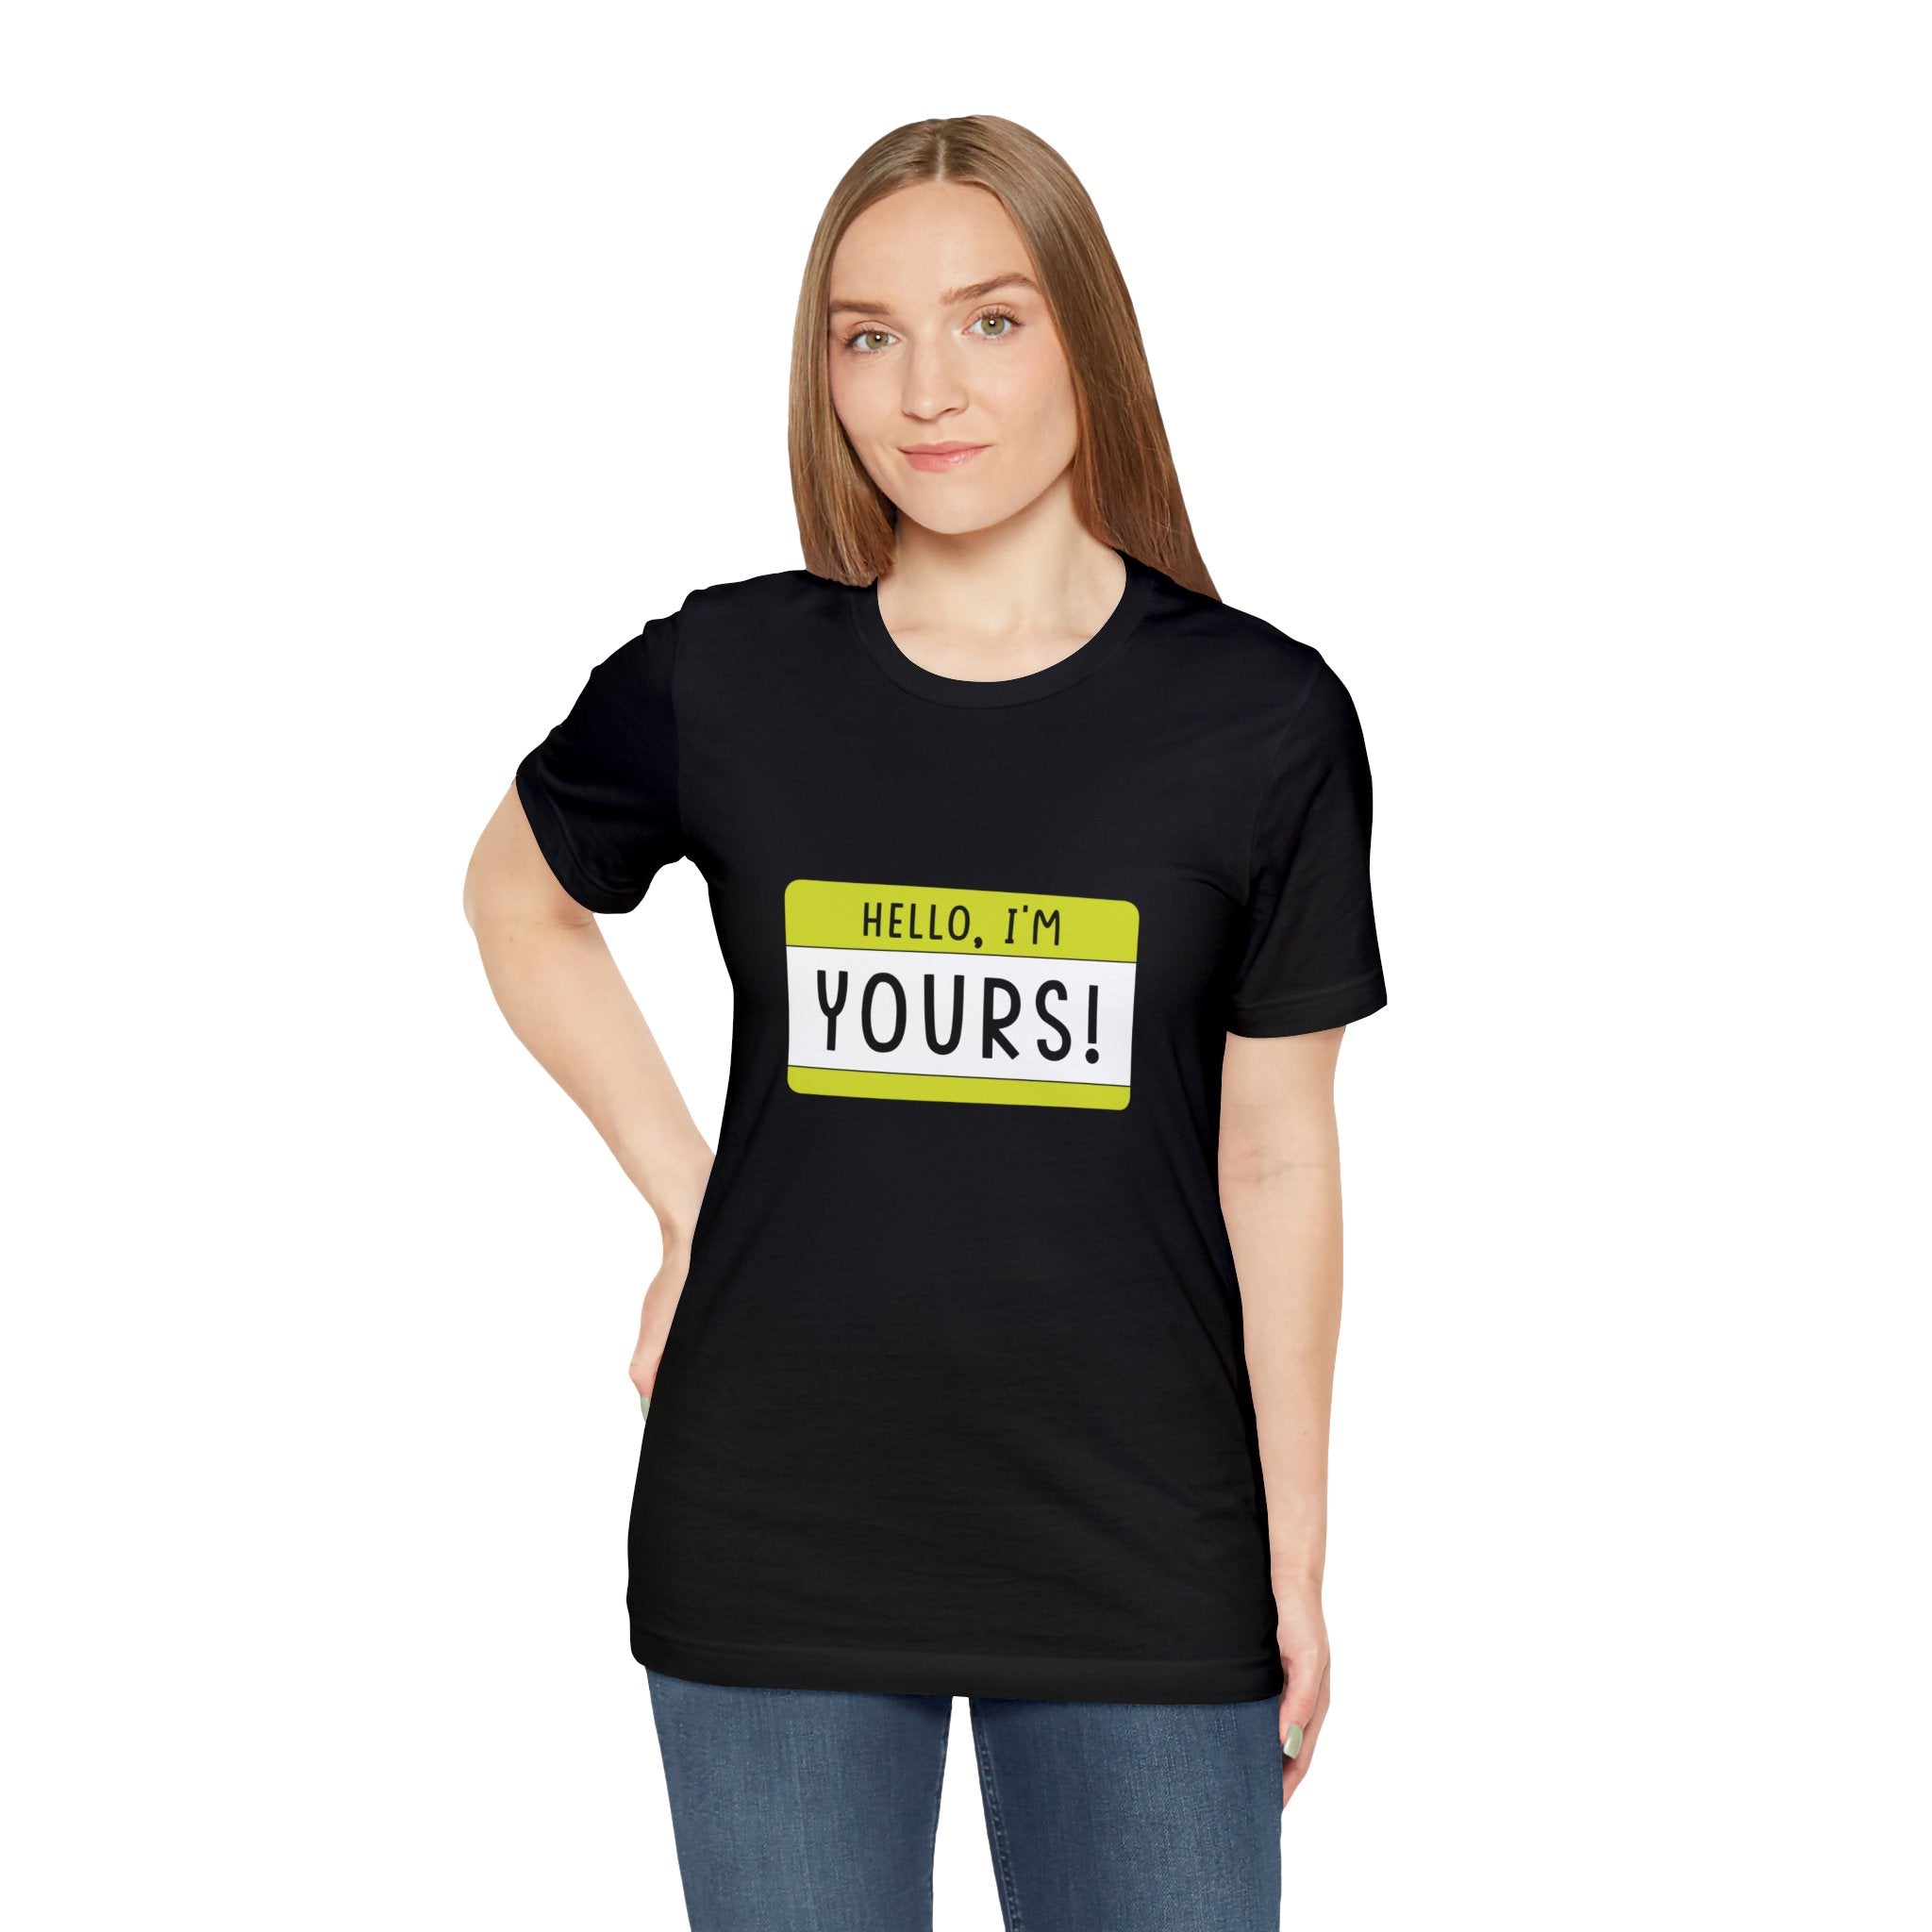 A woman in a black geeky Hello, I'm YOURS T-shirt stands facing the camera.